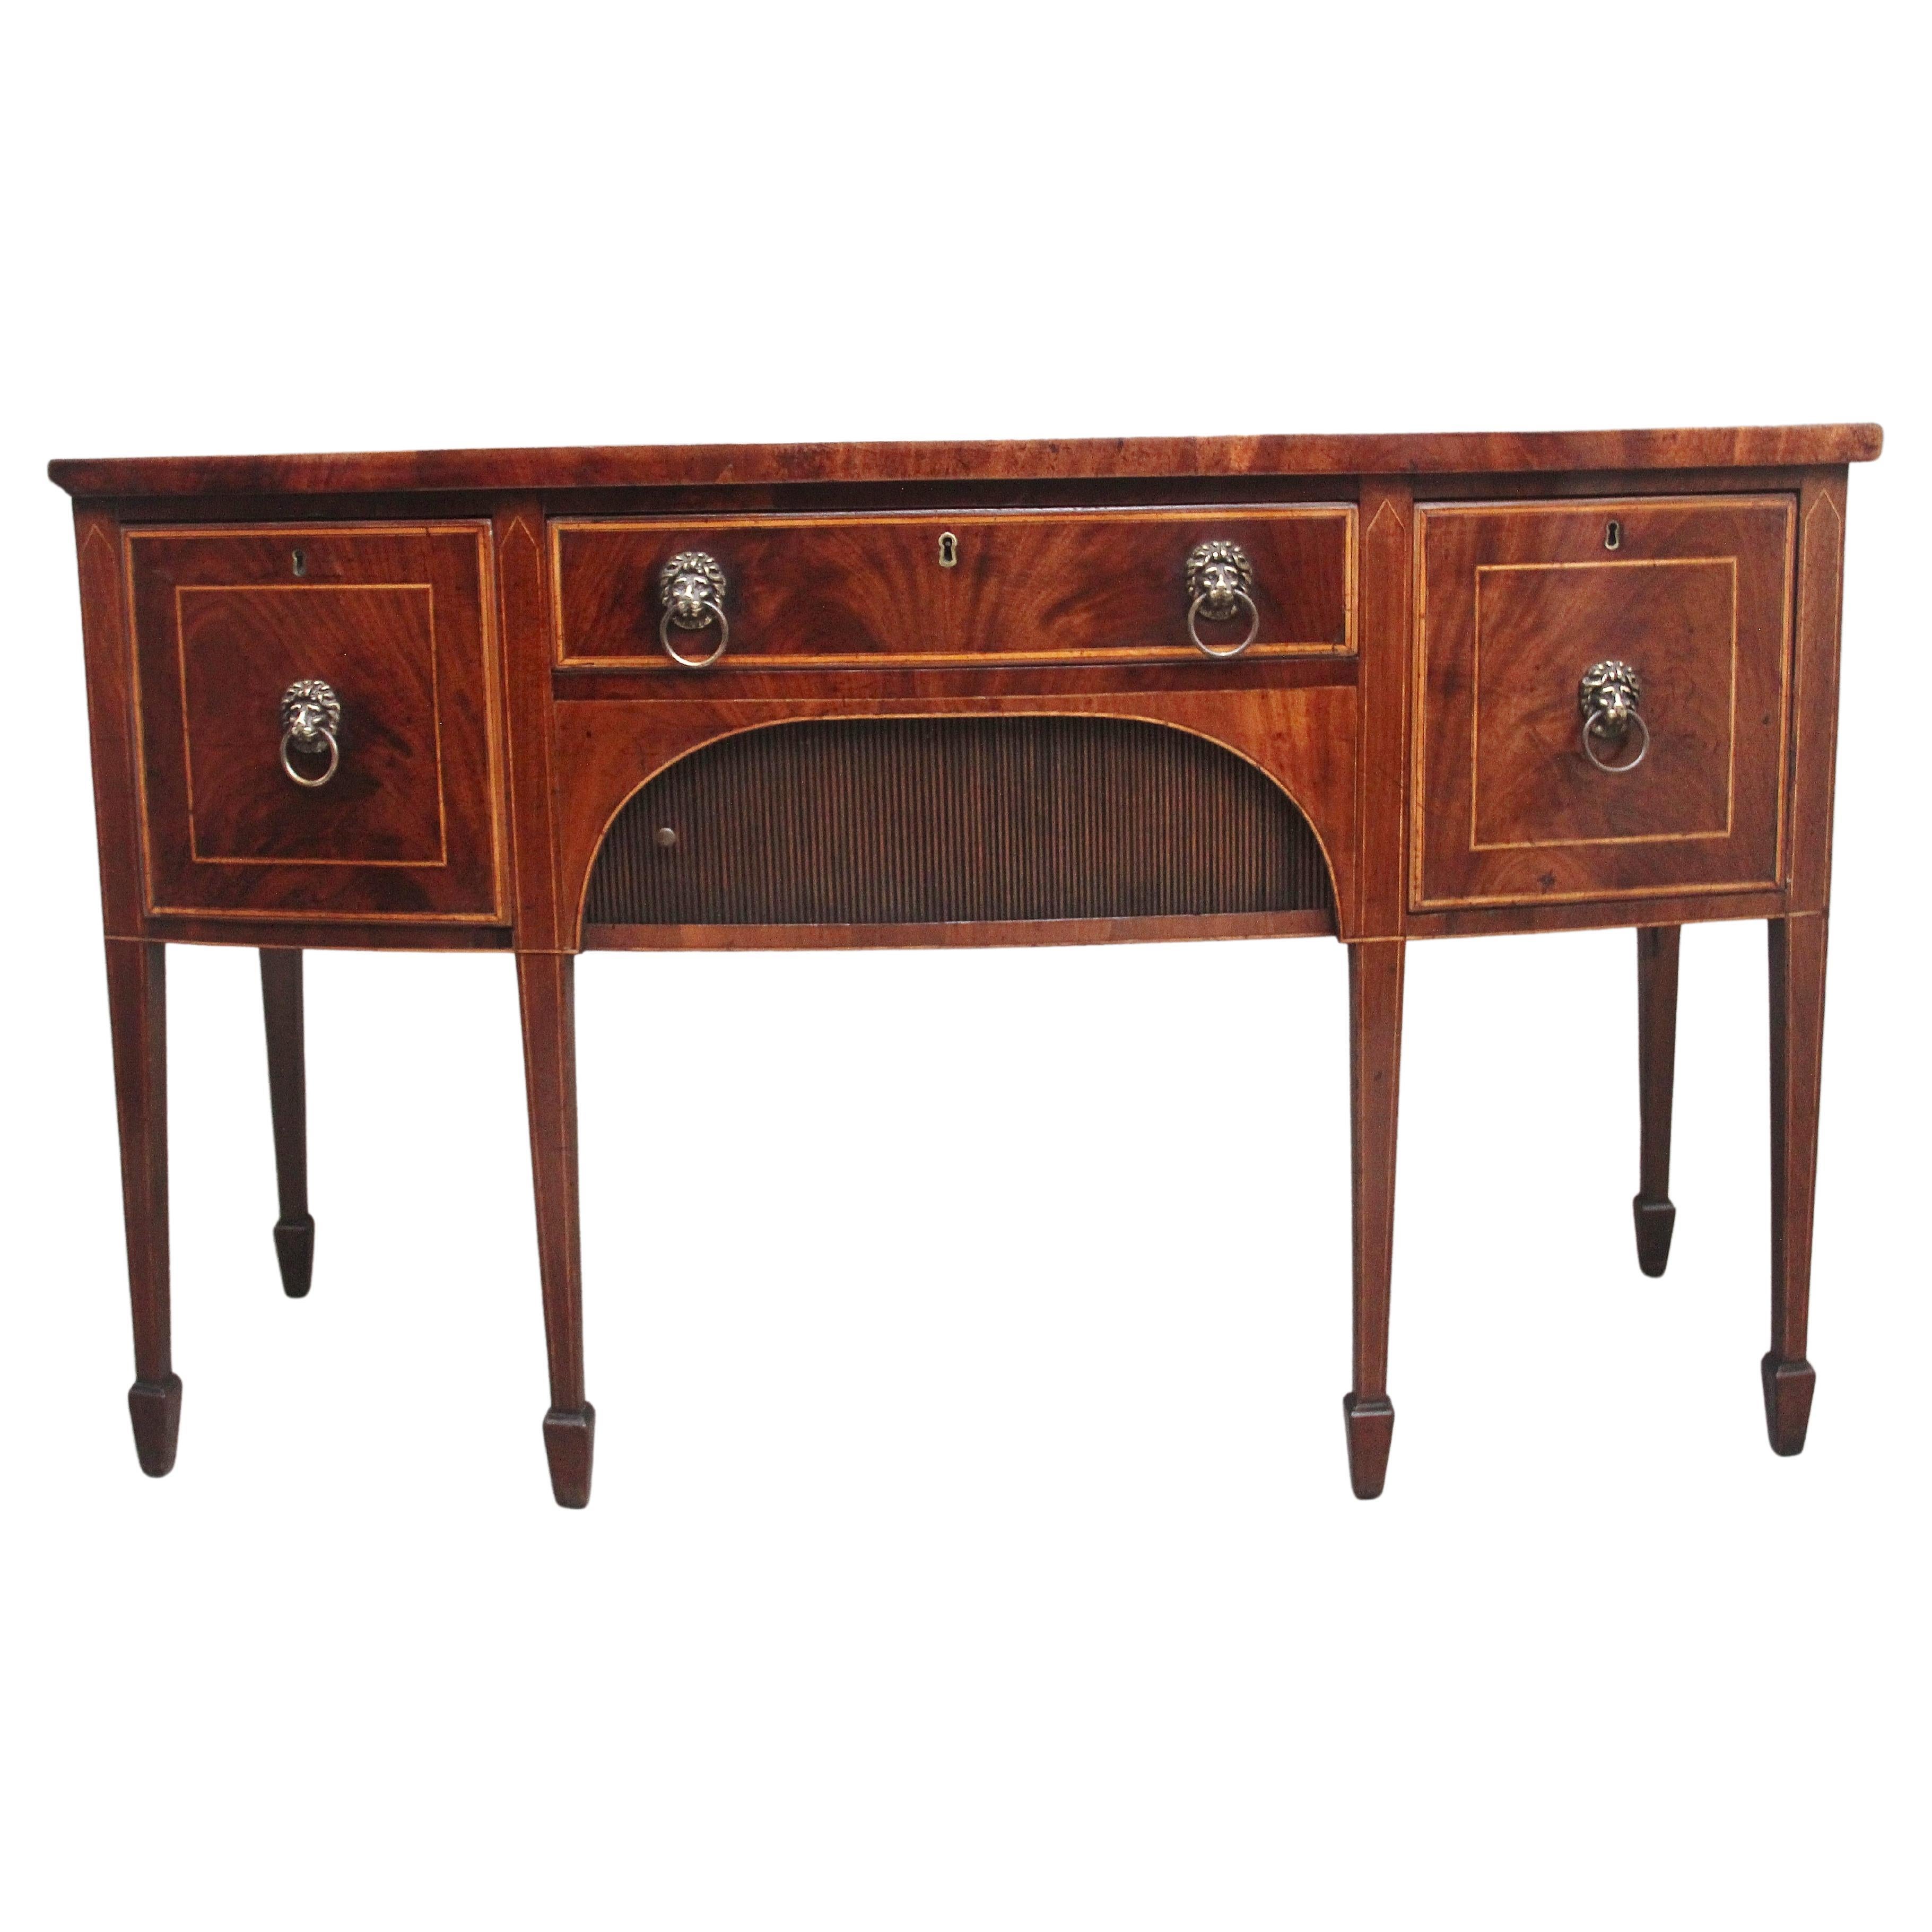 Early 19th Century mahogany bowfront sideboard For Sale